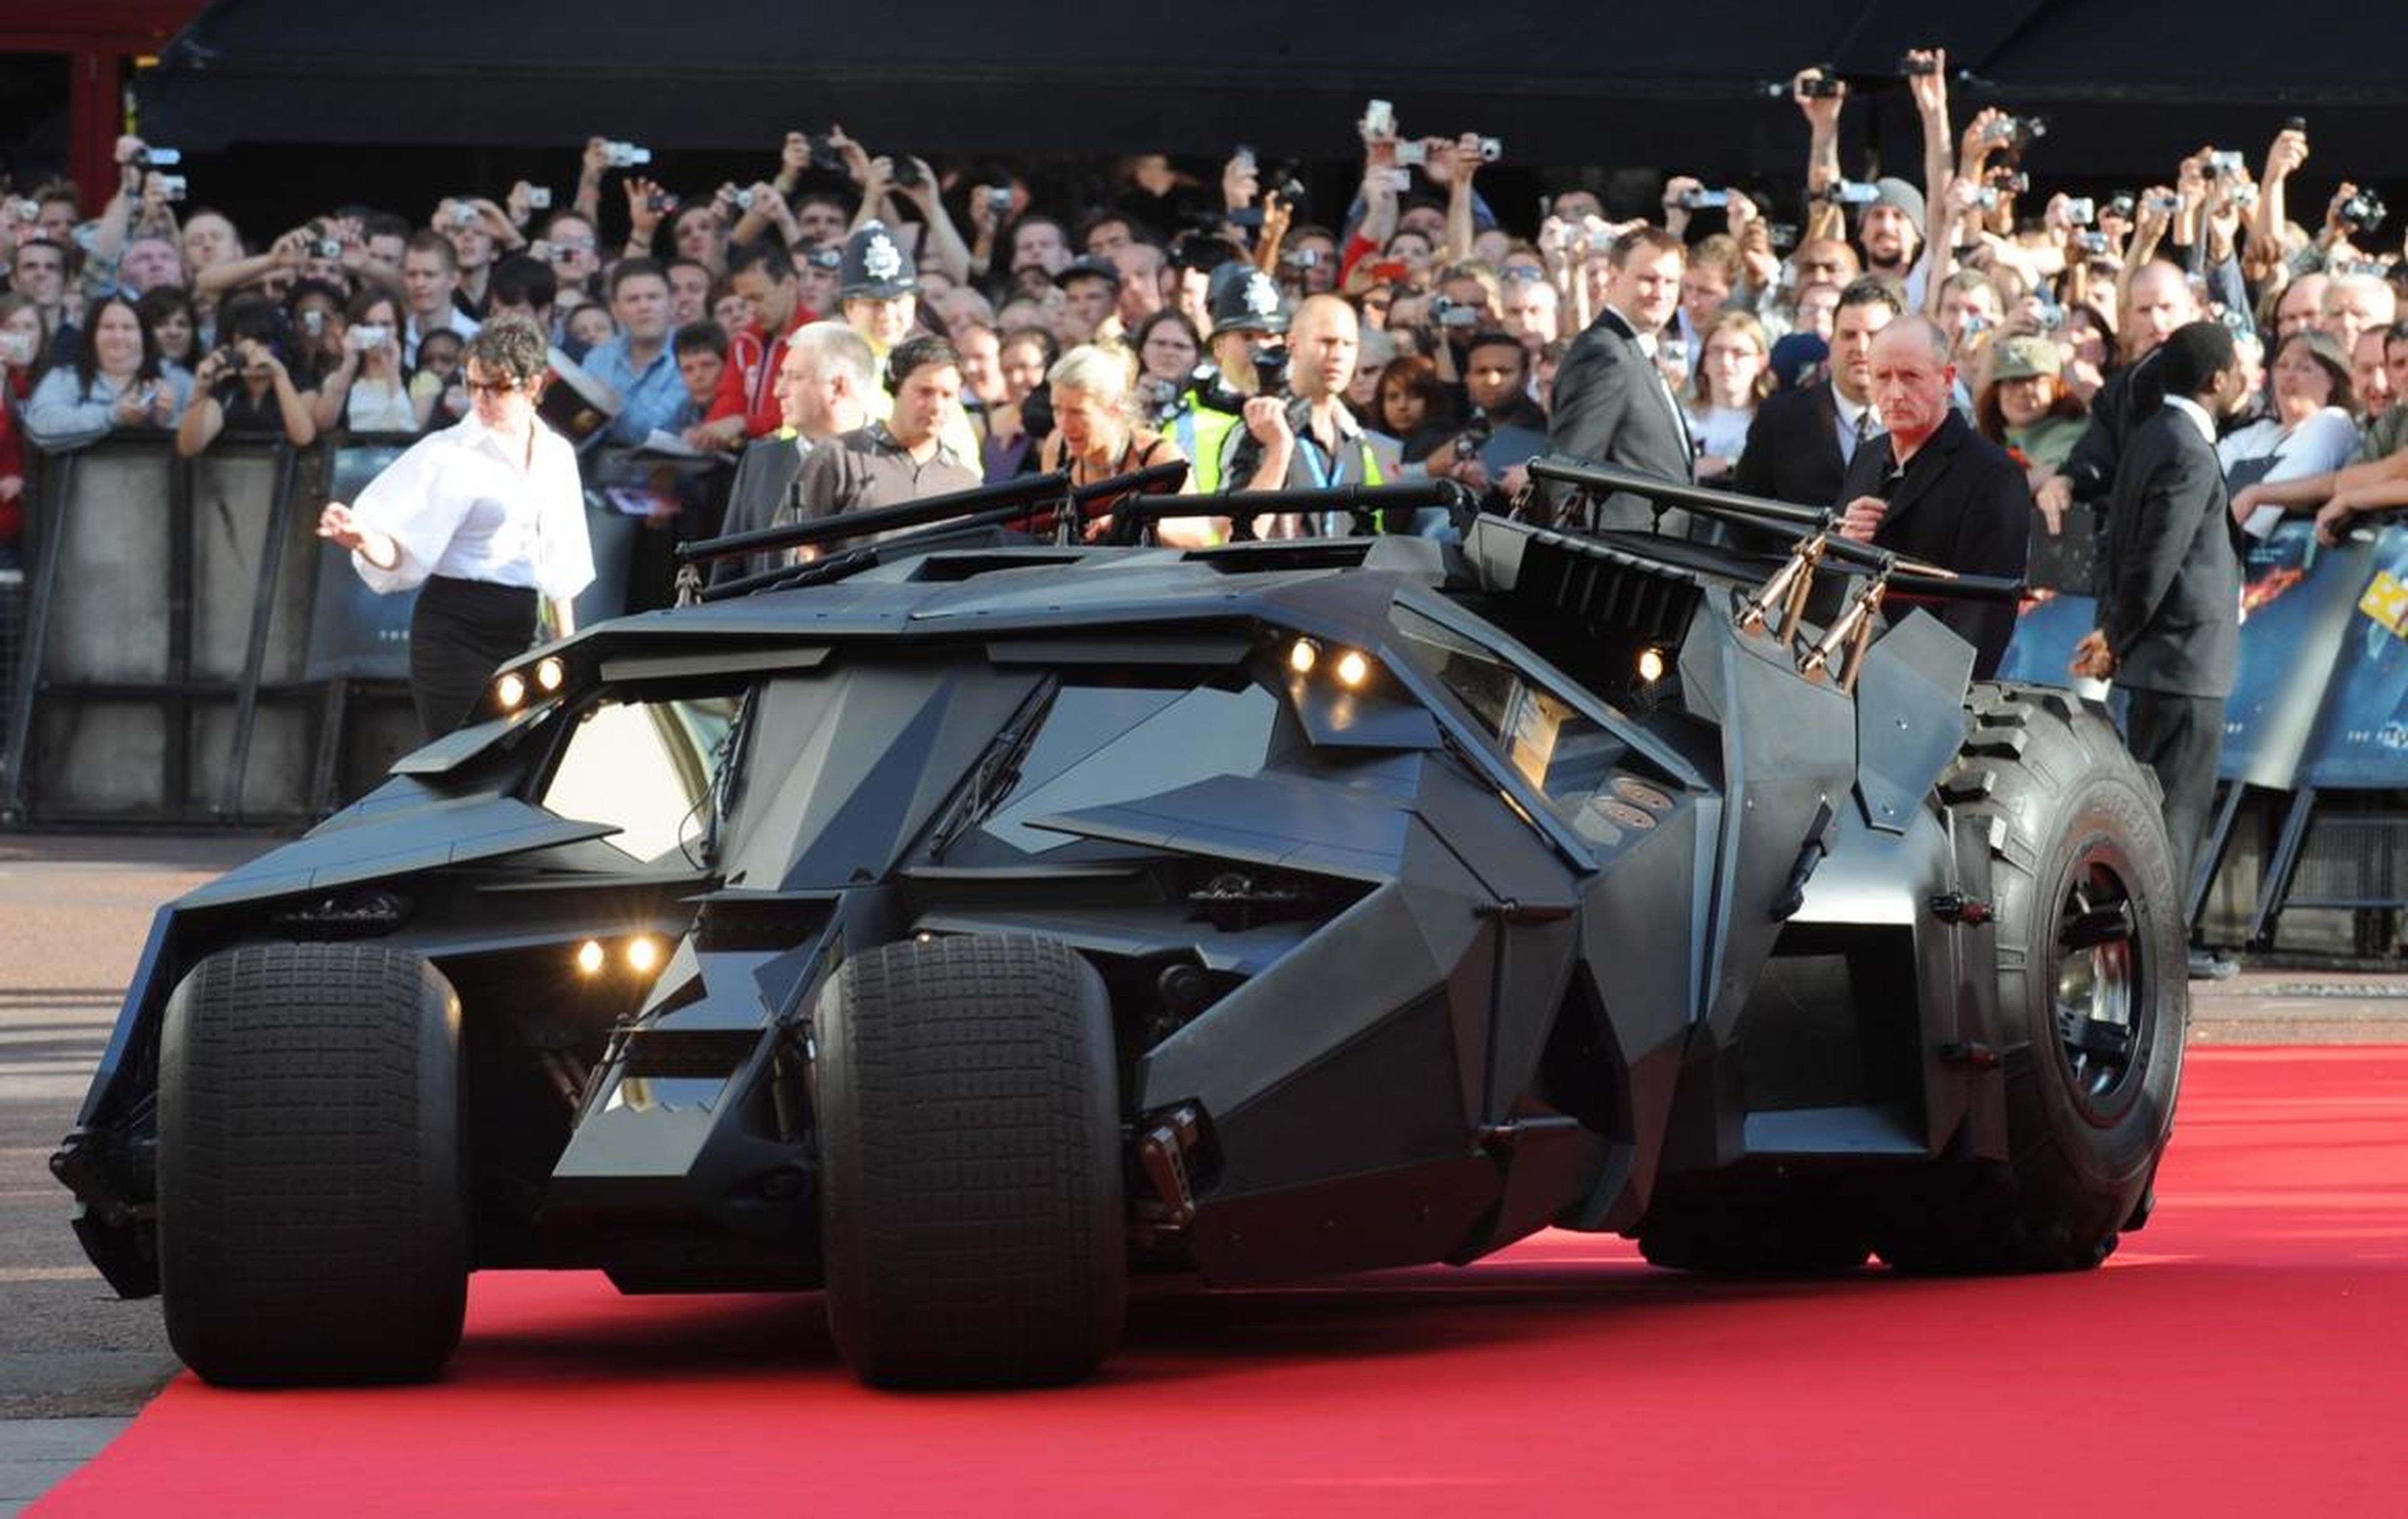 The Batmobile "Tumbler" and its successors in the films that followed offered a militaristic take on the Dark Knight's ride — and further Cybertruck inspiration from Hollywood.